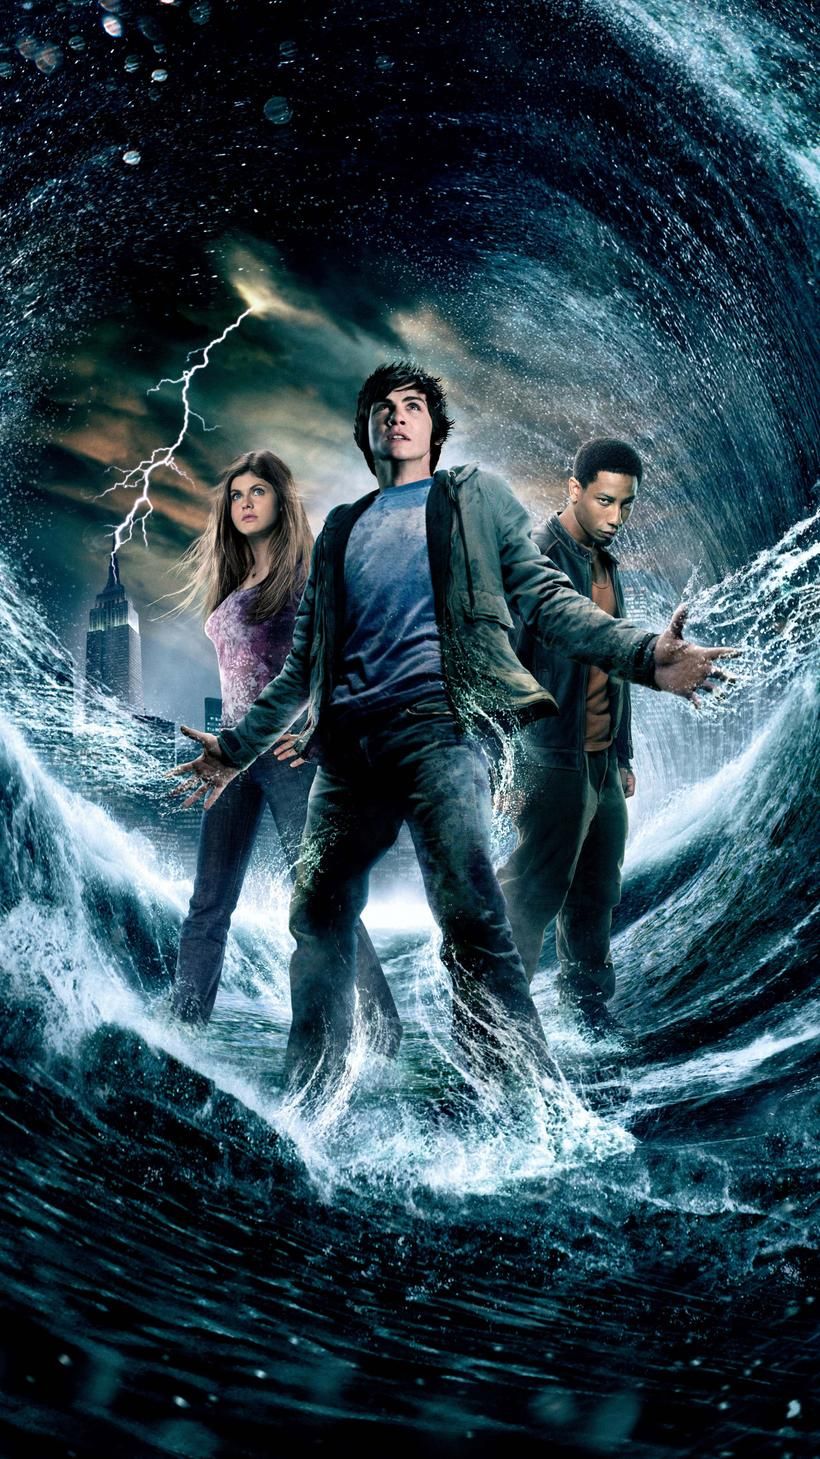 Harry Potter and the Philosopher's Stone (2001) Phone Wallpaper. Moviemania. Percy jackson wallpaper, Percy jackson movie, Percy jackson